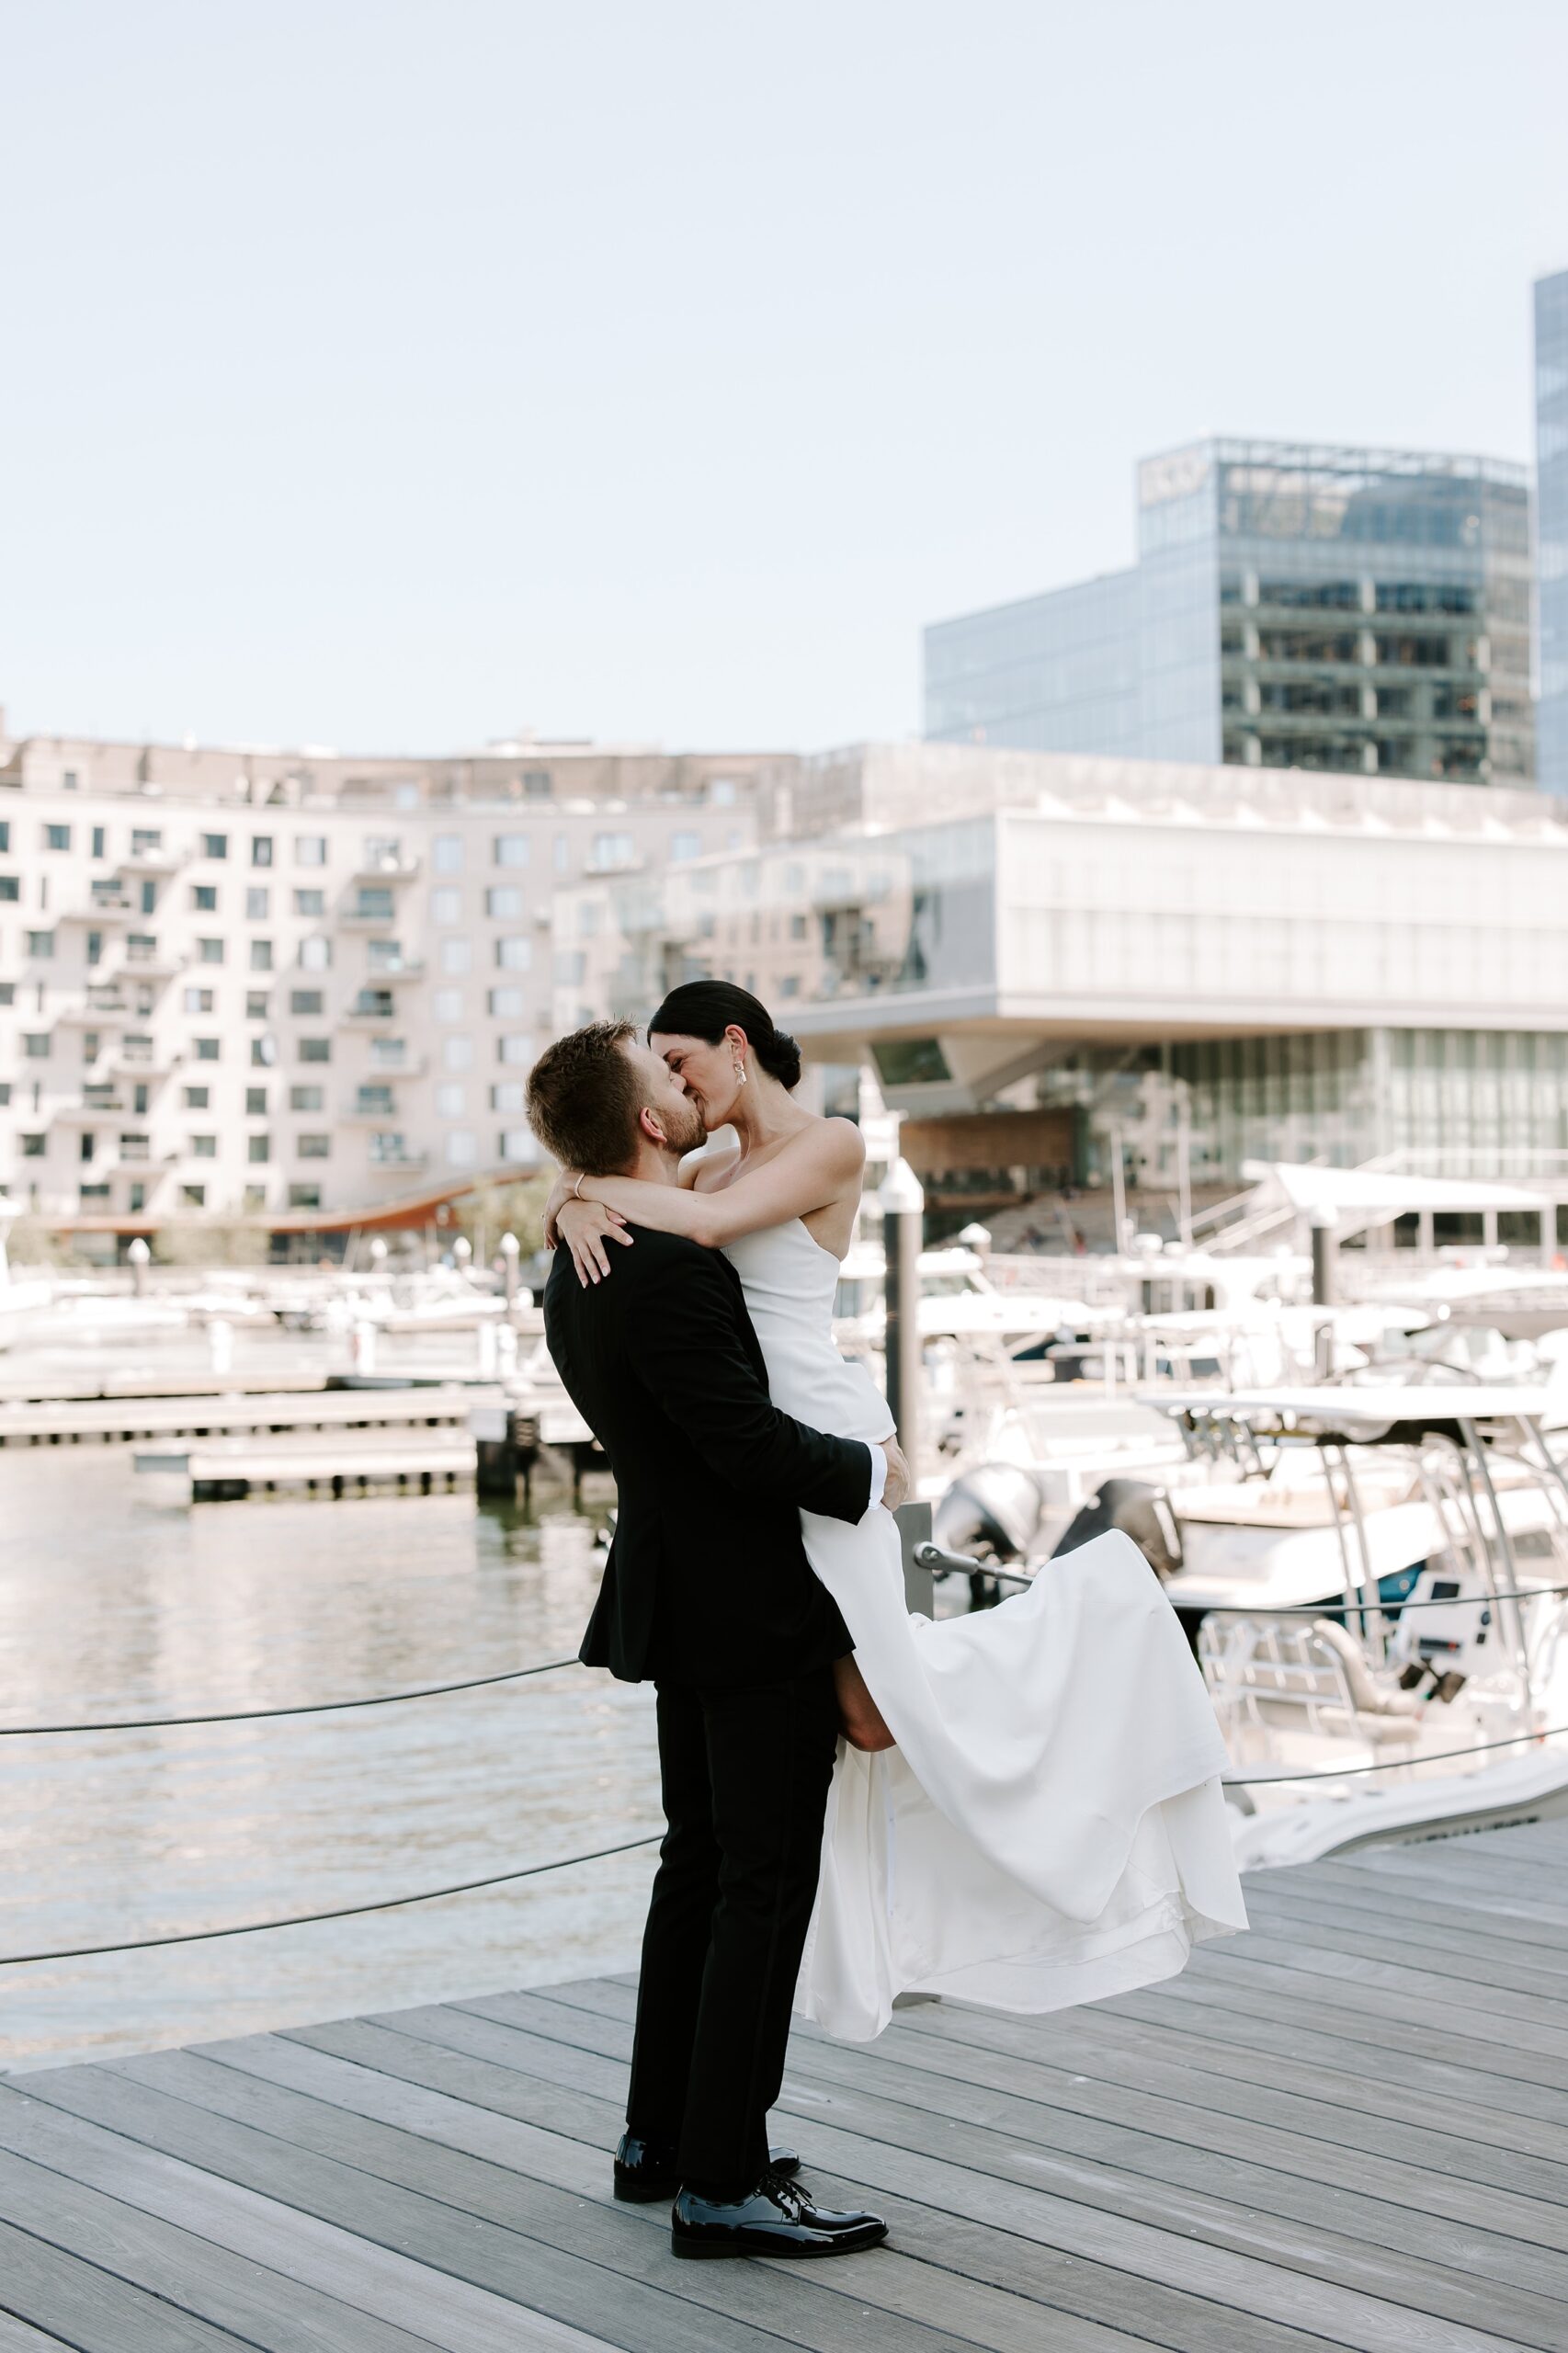 Bride and groom portraits at Boston Seaport